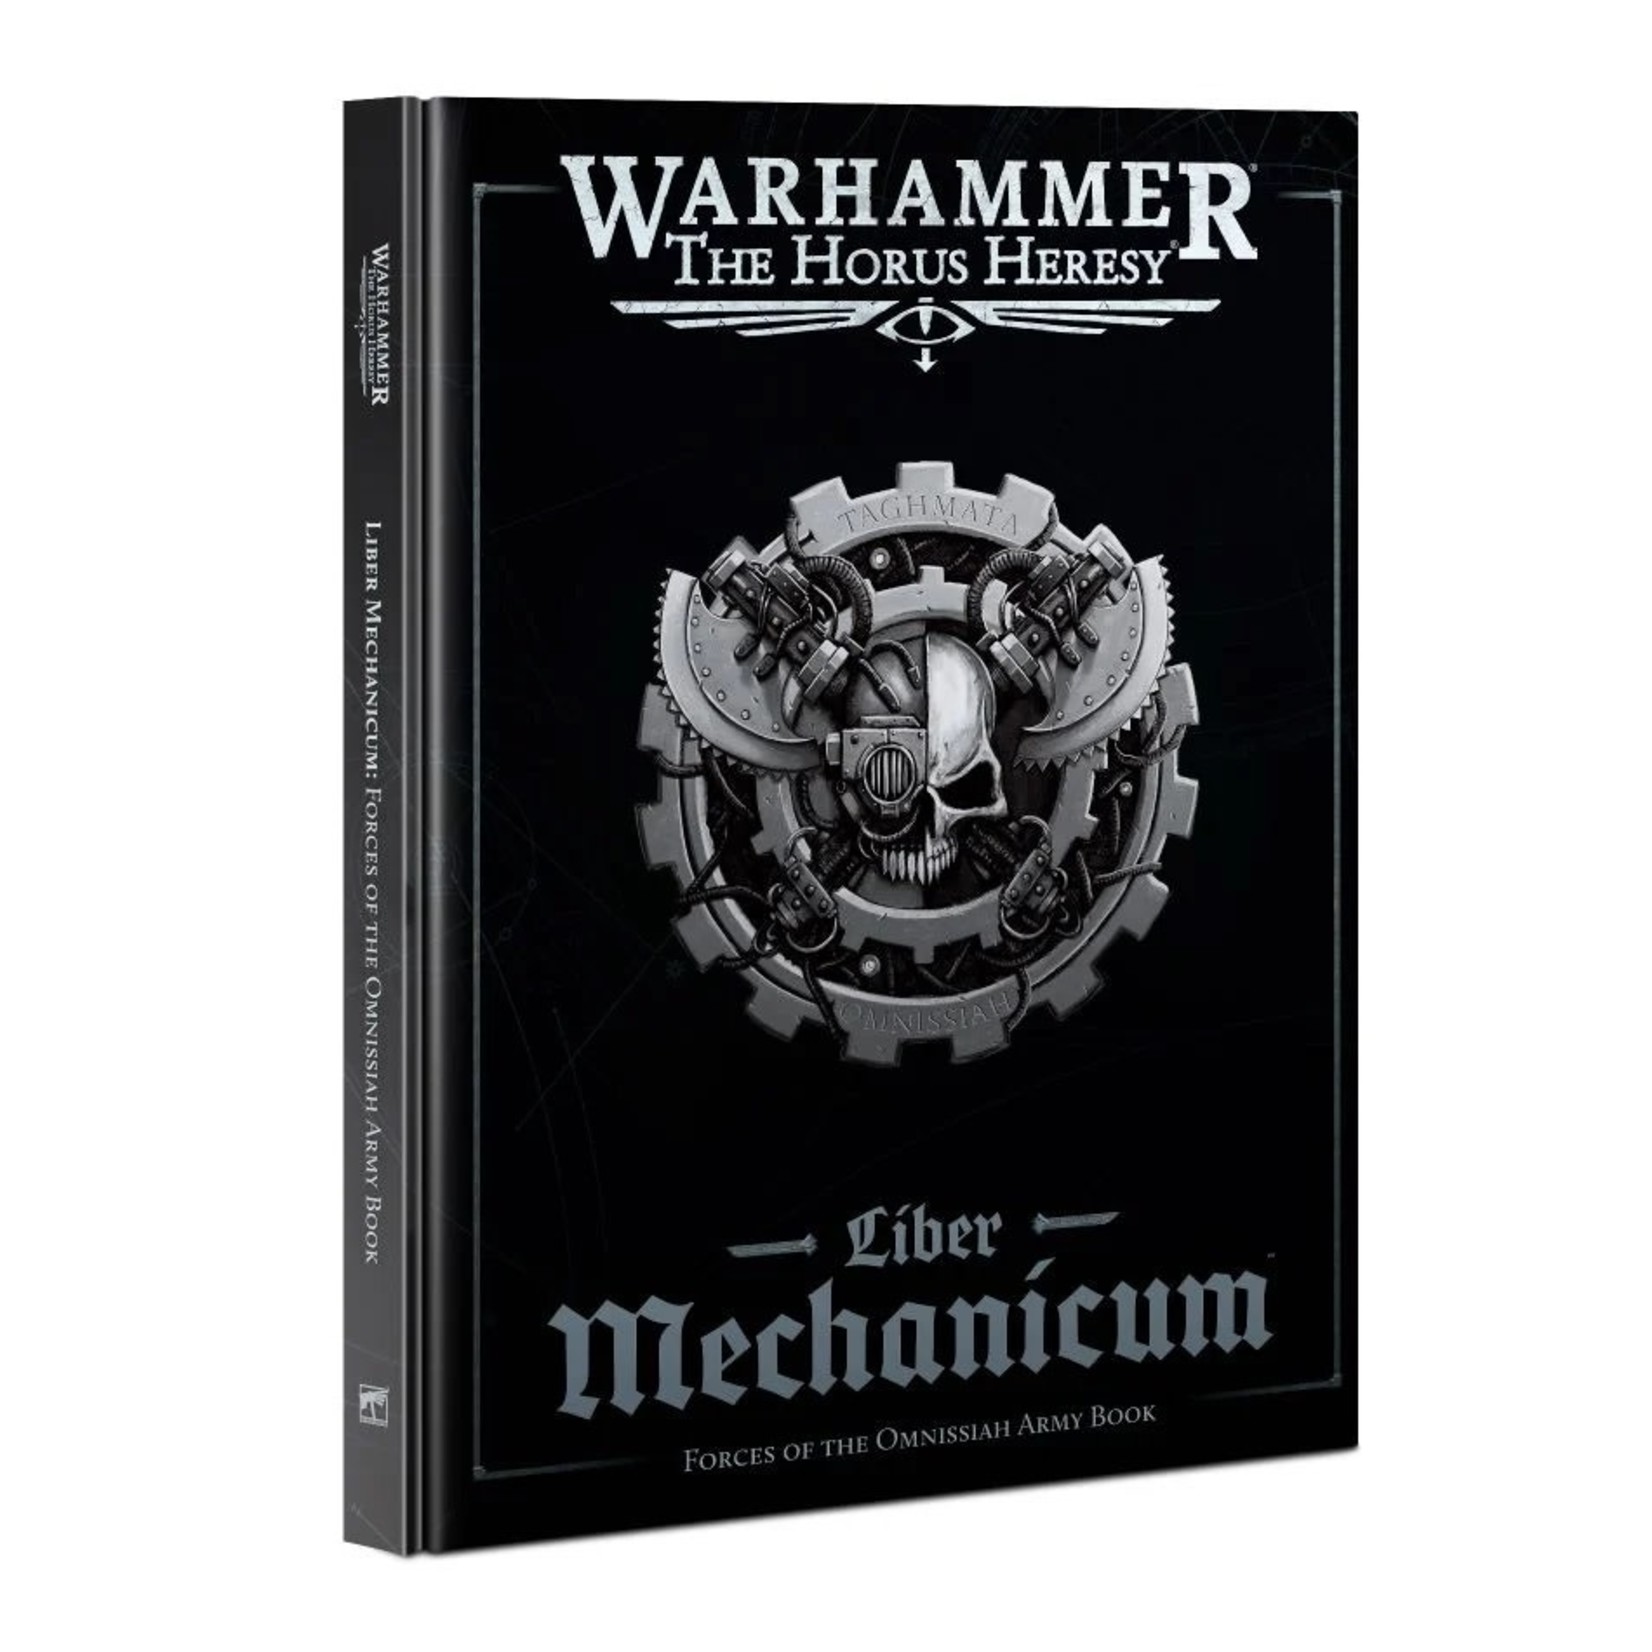 Liber Mechanicum Forces of the Omnissiah Army Book